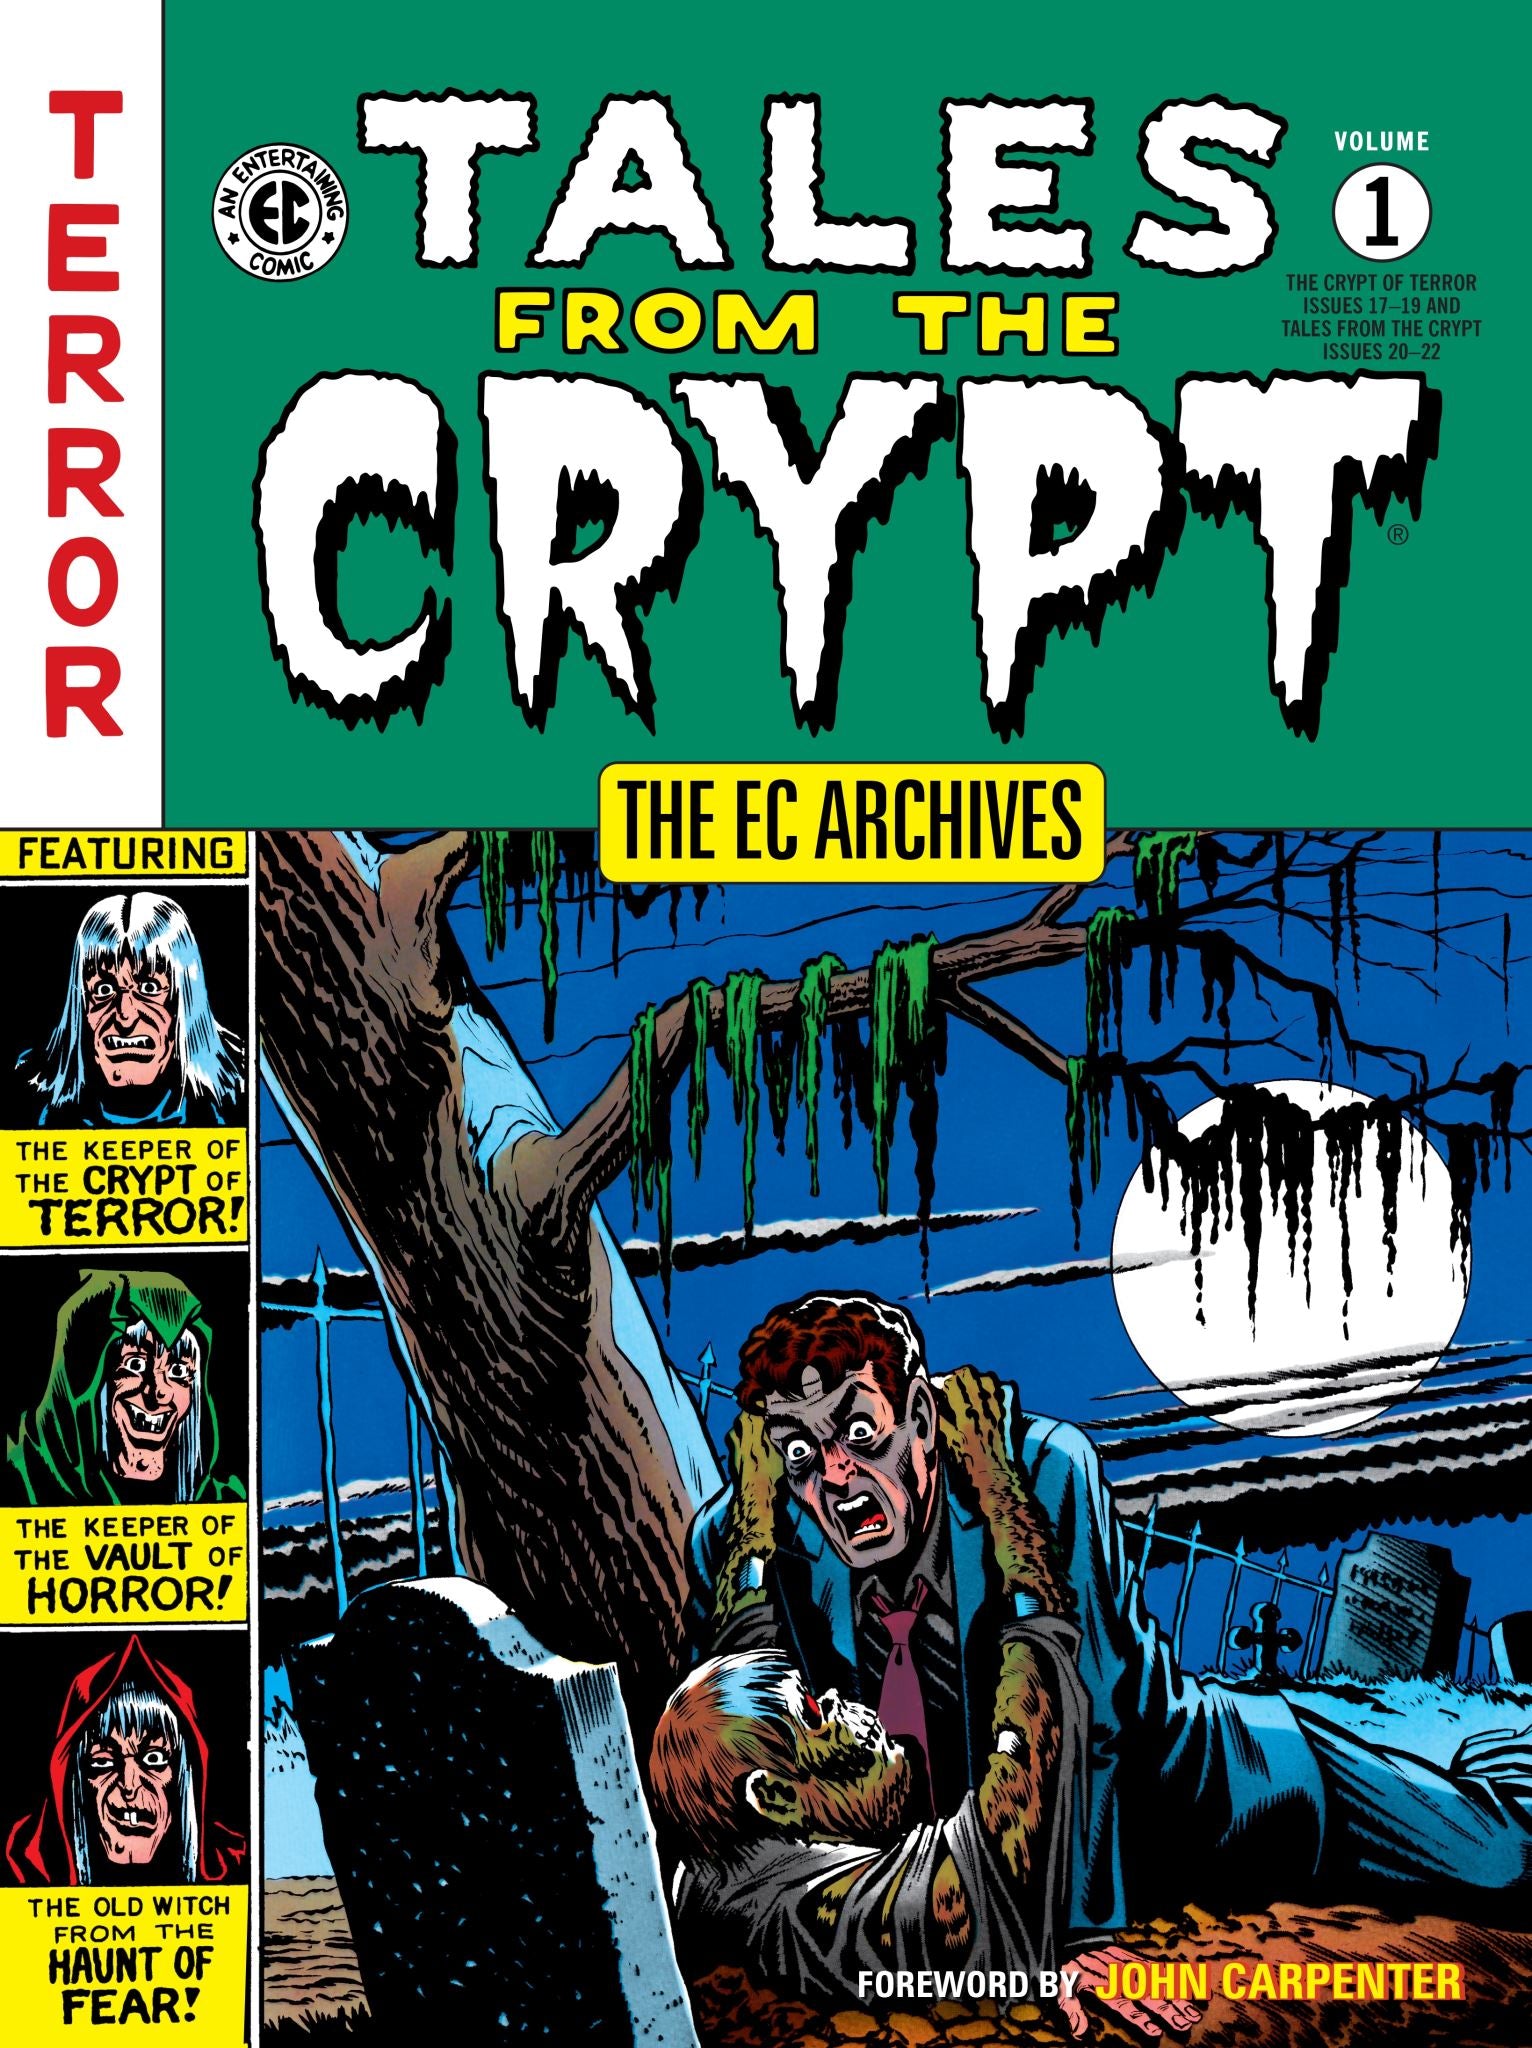 The EC Archives Tales from the Crypt Volume 1